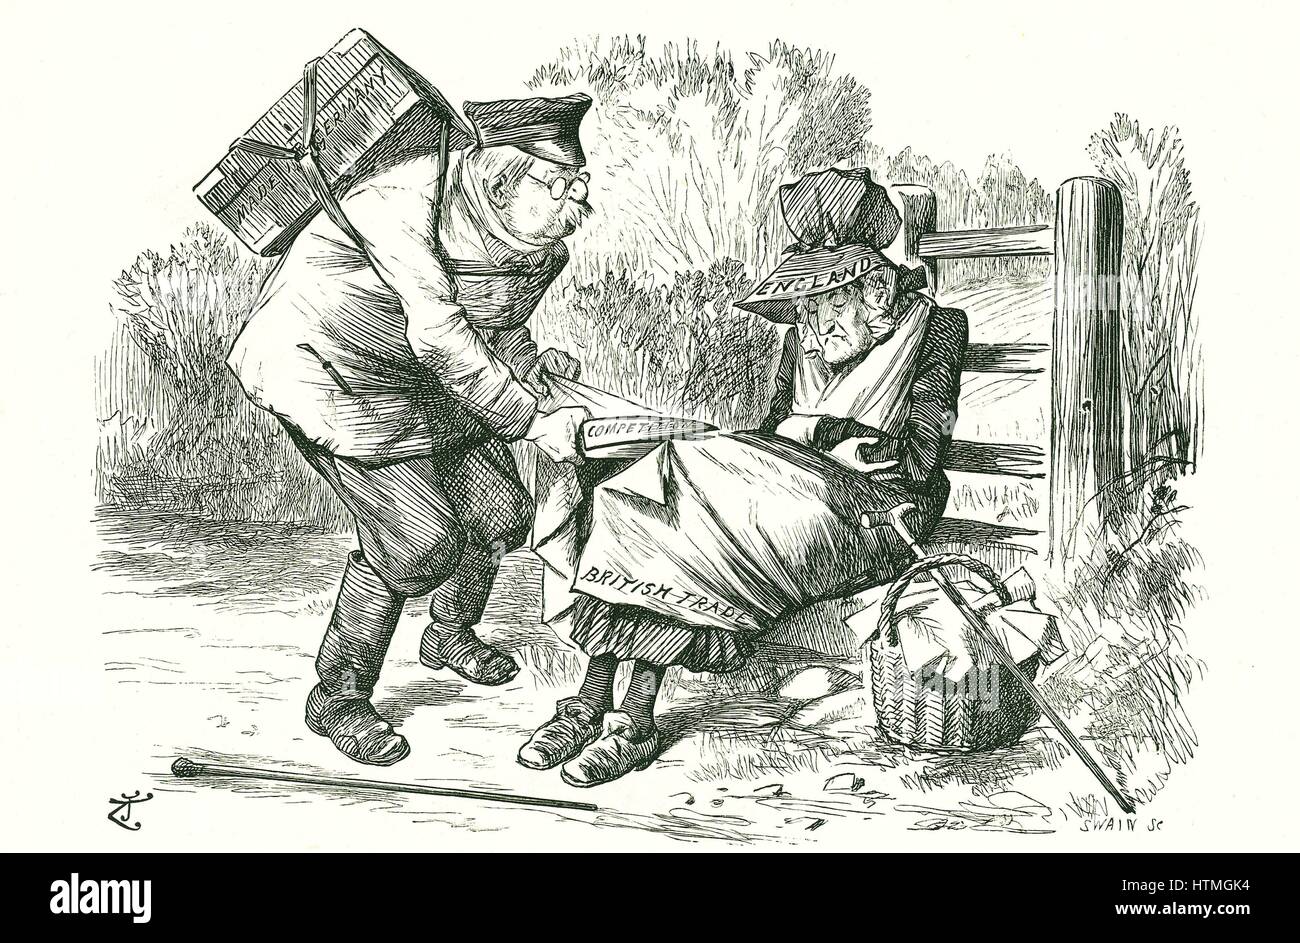 Germany stealing Britain's position as world leader in trade and manufacture. Cartoon by John Tenniel from 'Punch', 5 September 1896. Stock Photo